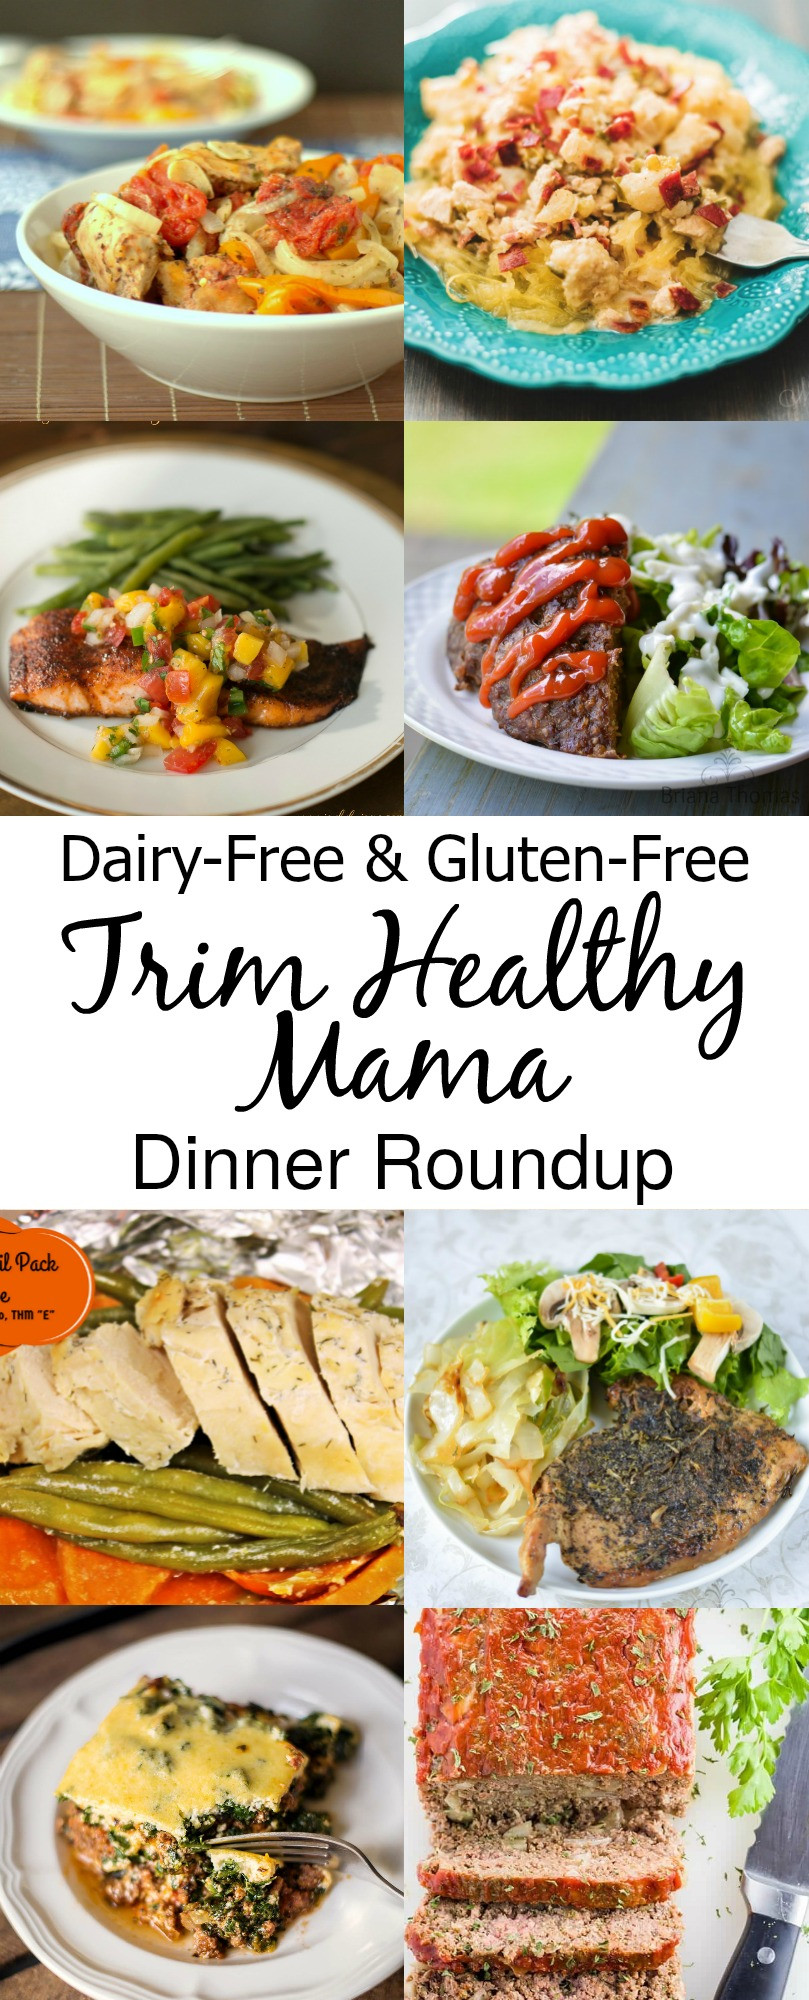 Gluten Free Dairy Free Dinners
 Dairy Free and Gluten Free Trim Healthy Mama Dinners